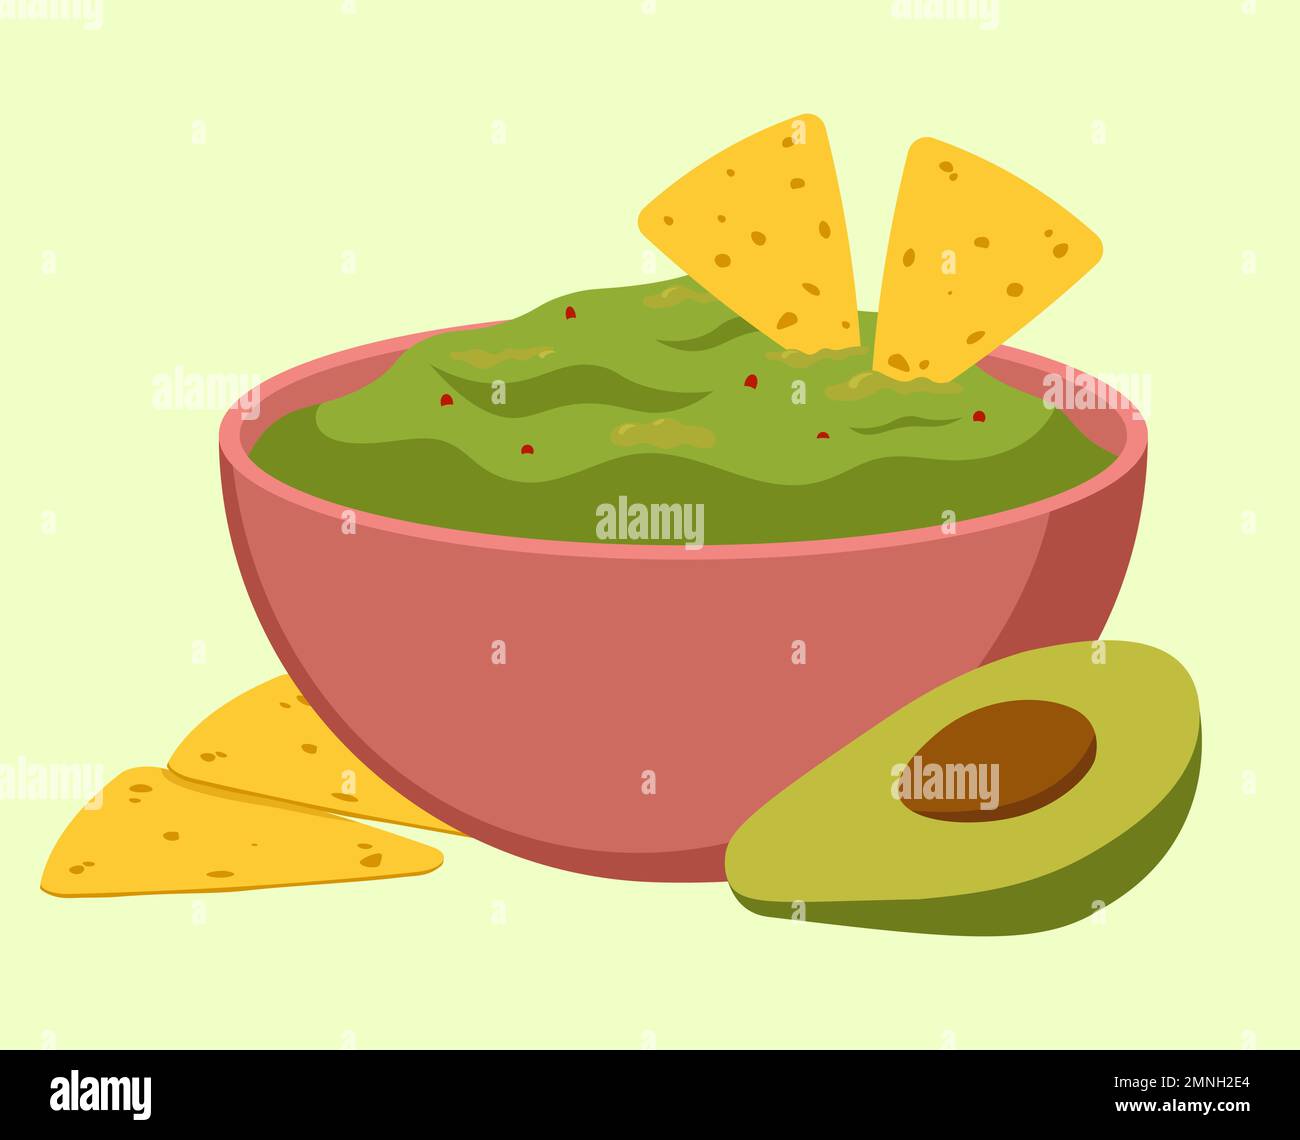 Guacamole In The Bowl With Avocado And Nachos Food Vector Illustration In Flat Style Stock Vector